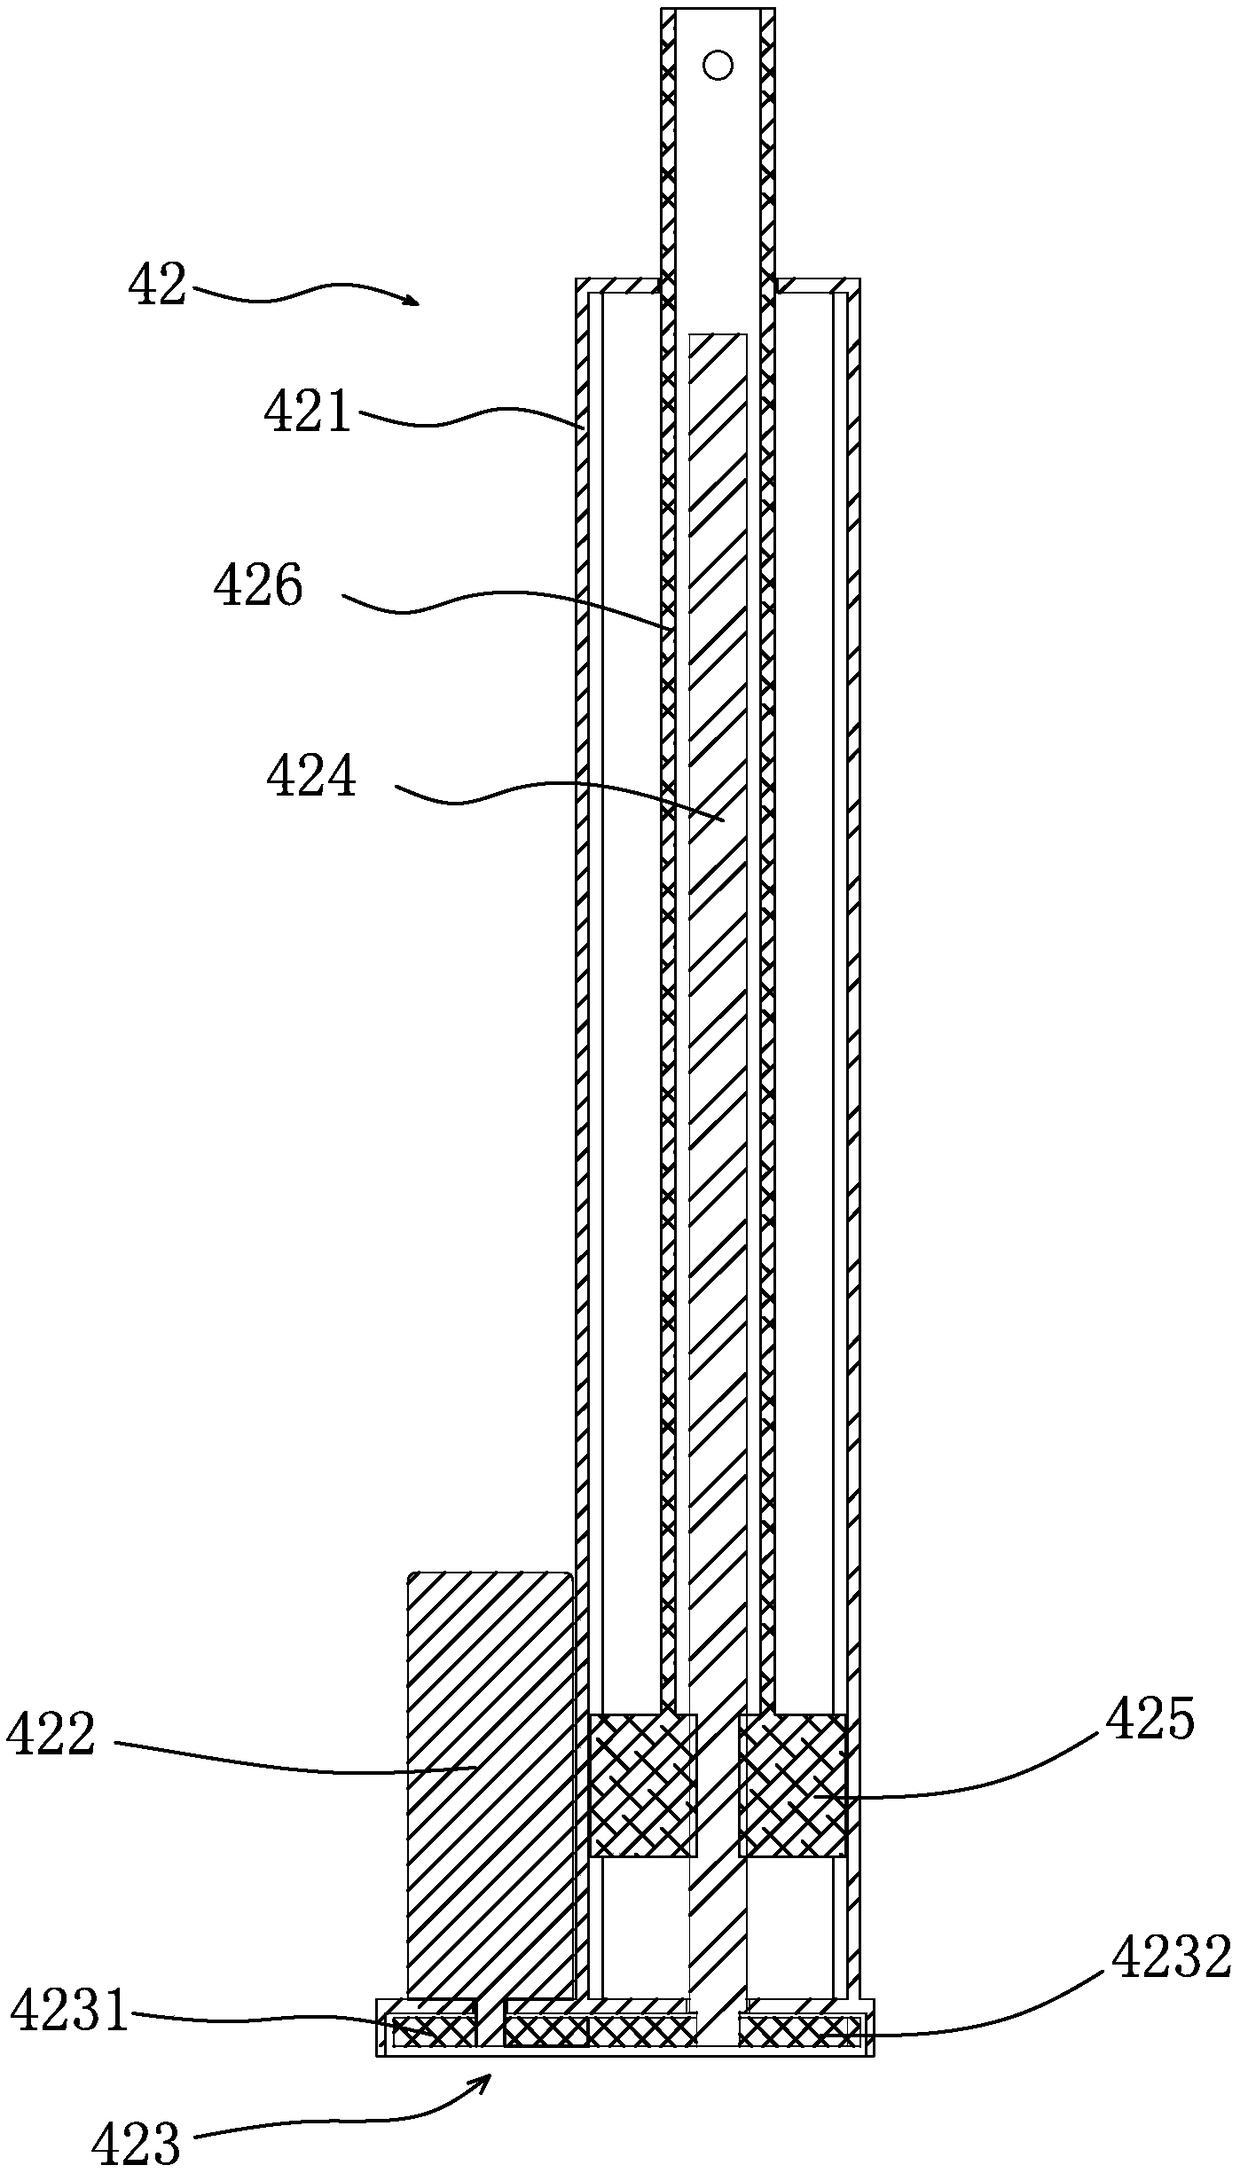 Knitting machine dust removing device capable of lifting and changing rotating angle